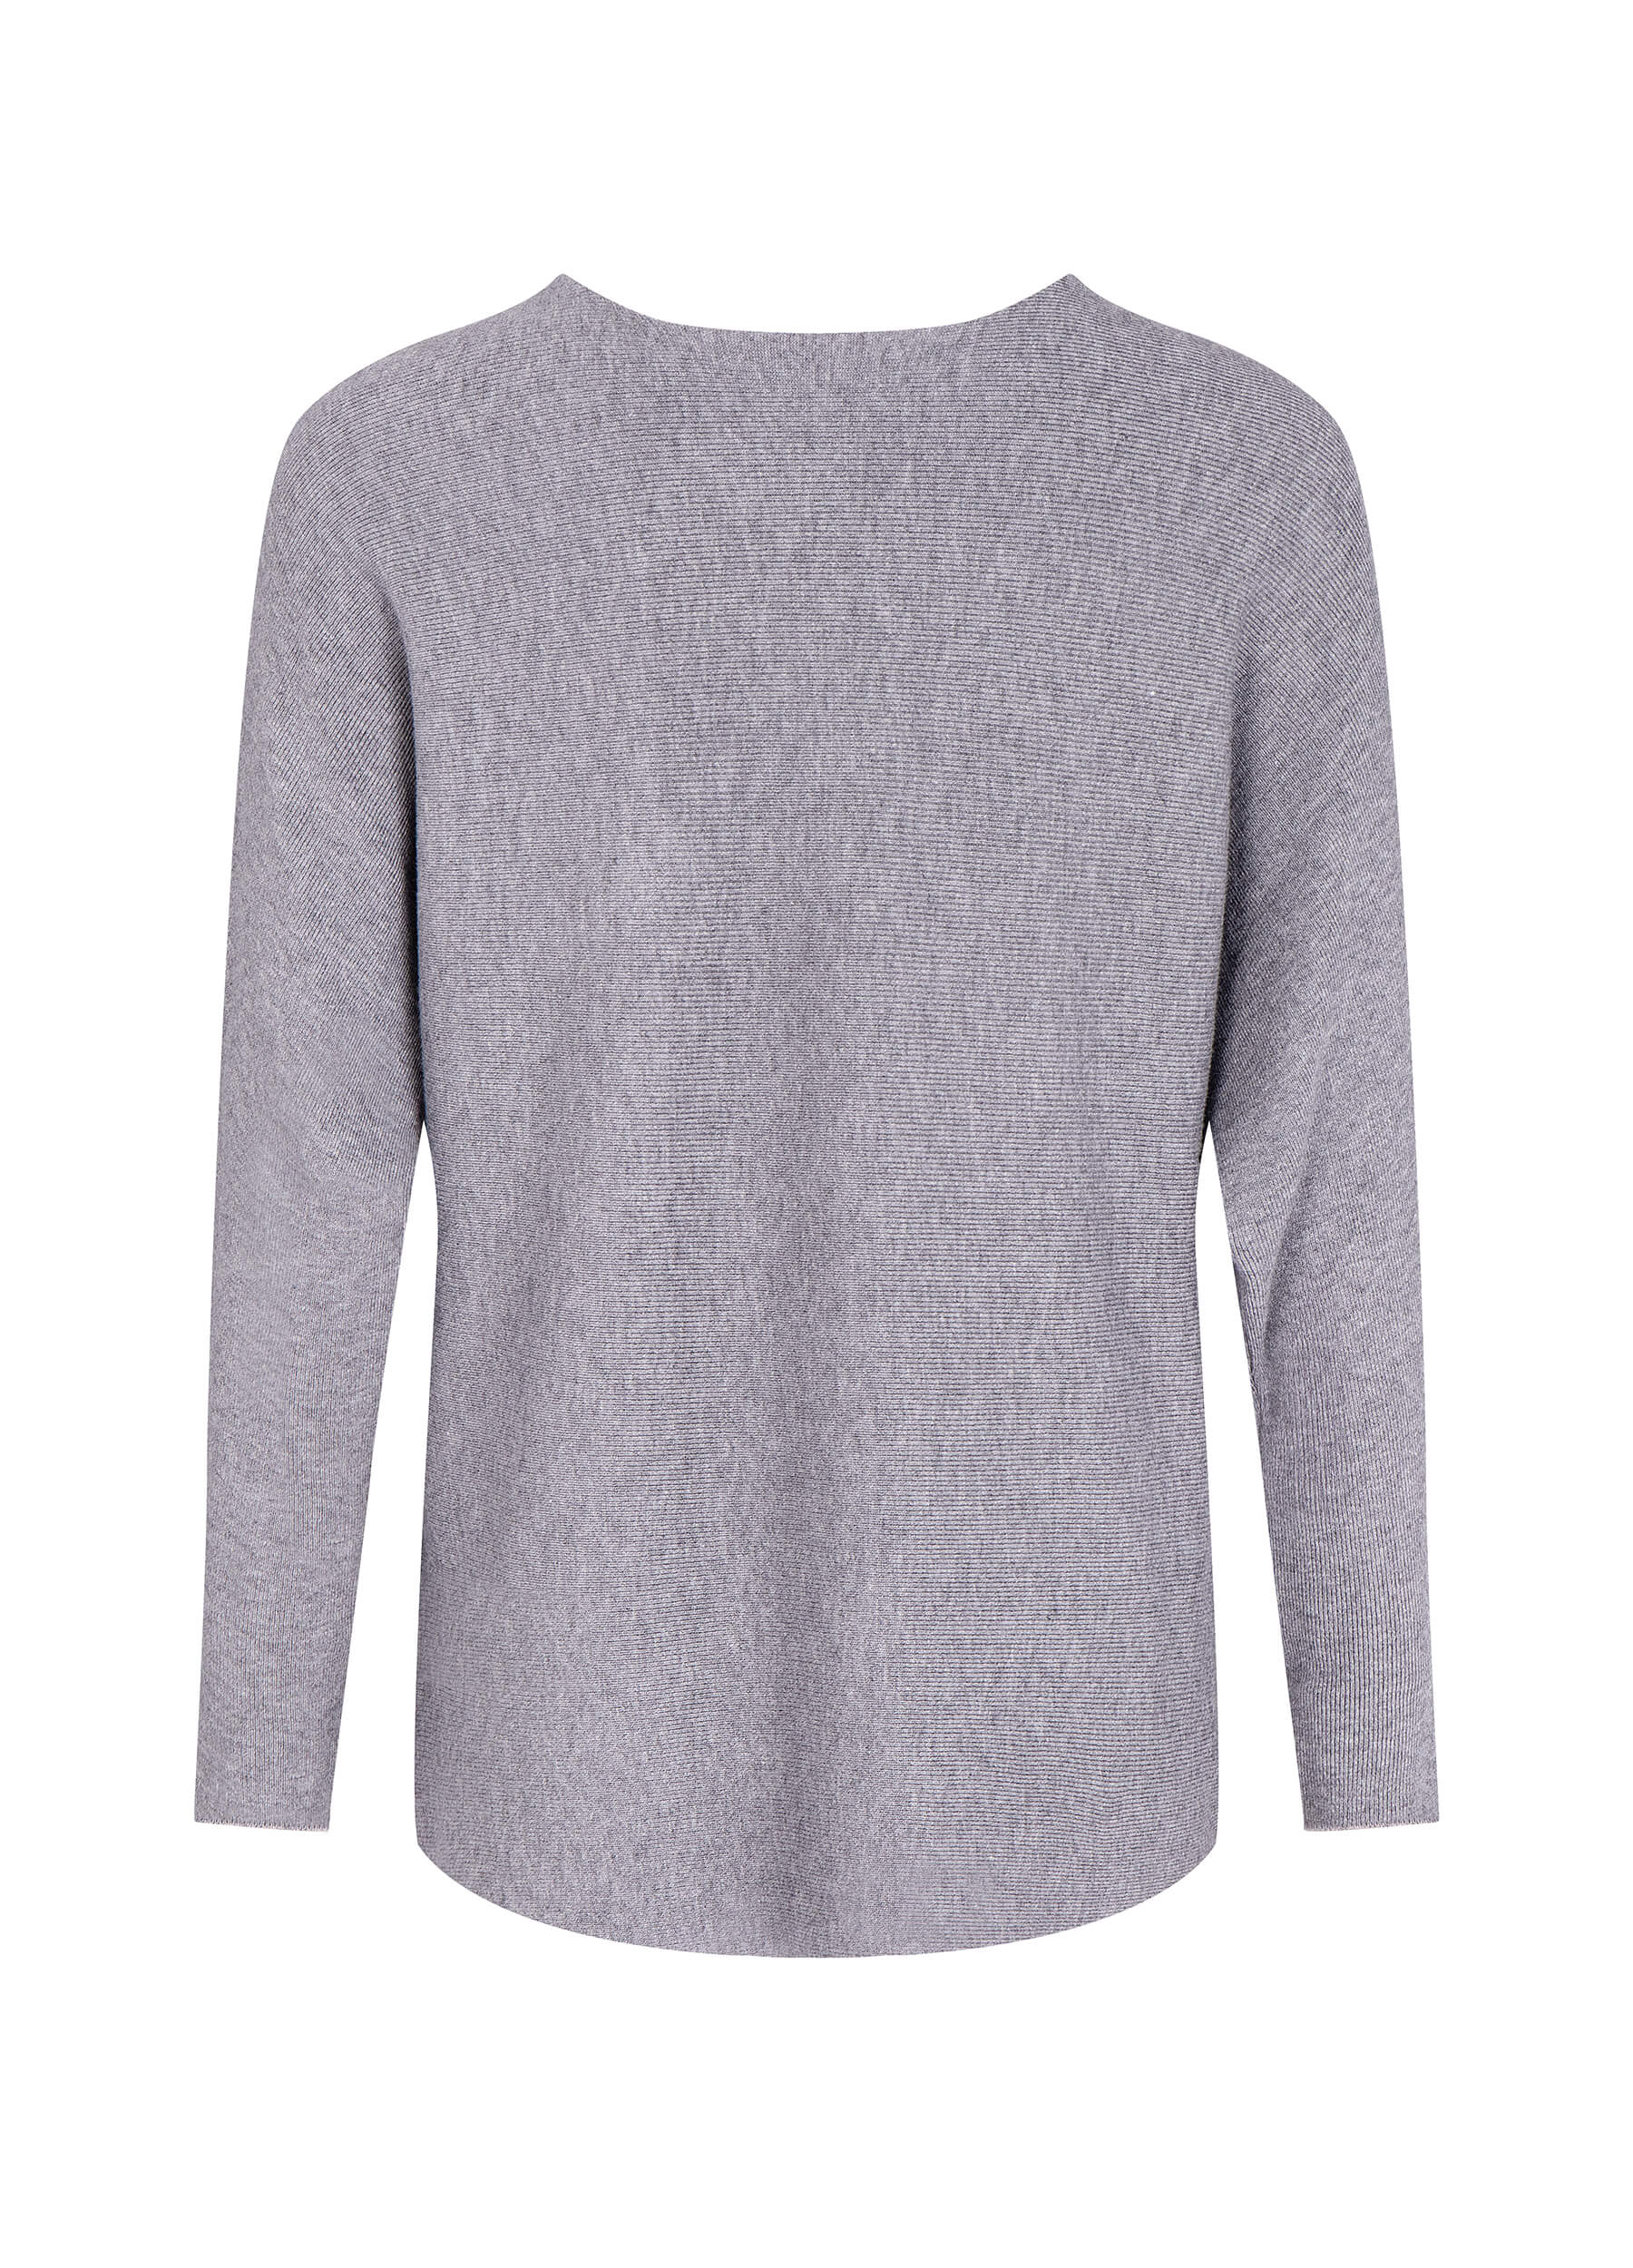 FINEPEEK Women's Fall Leaf Applique Round Neck Long Sleeve Pullover Sweater-Grey